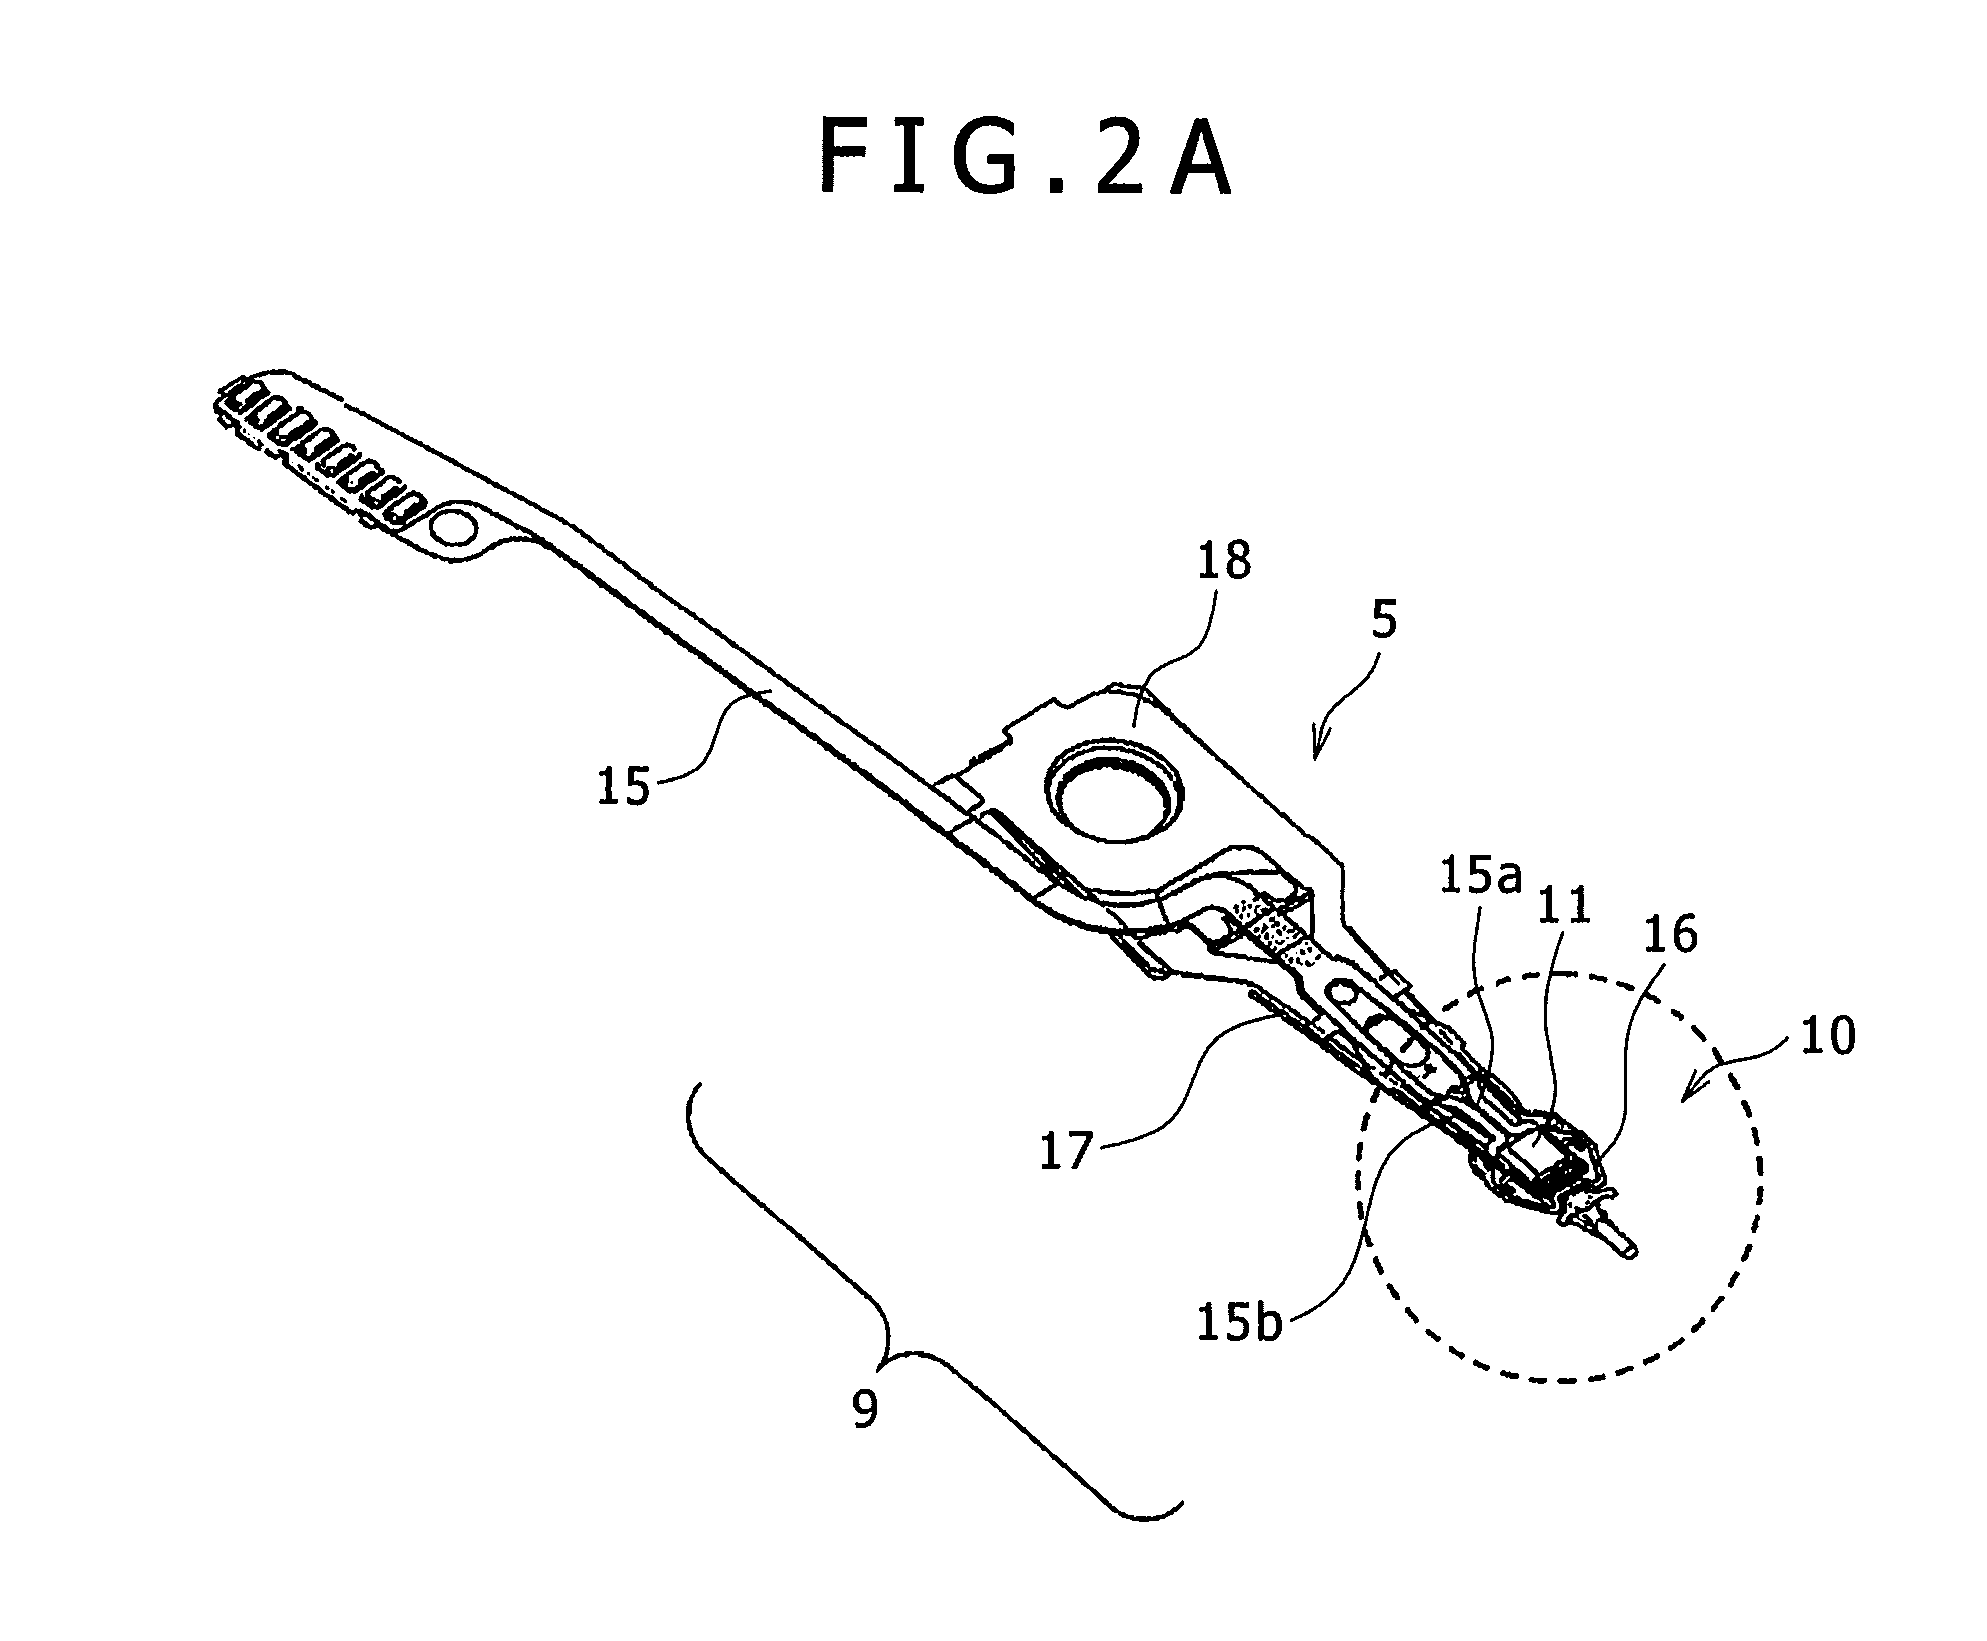 Head-gimbal-assembly capable of inhibiting effects of deterioration in lateral balance of heat-assisted magnetic recording head